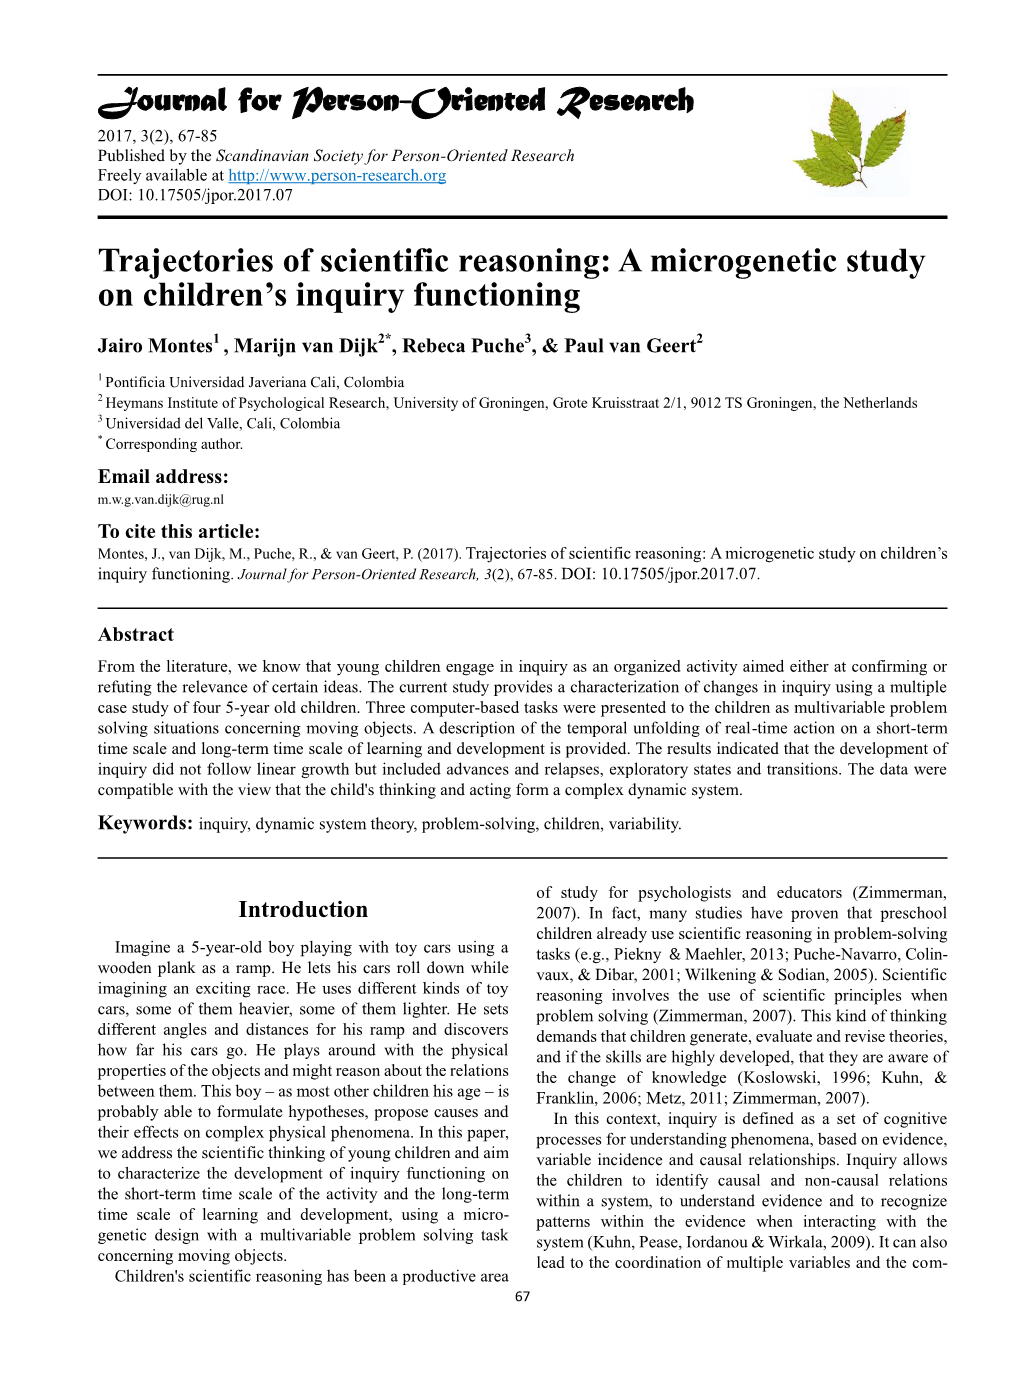 Journal for Person-Oriented Research Trajectories of Scientific Reasoning: a Microgenetic Study on Children's Inquiry Function